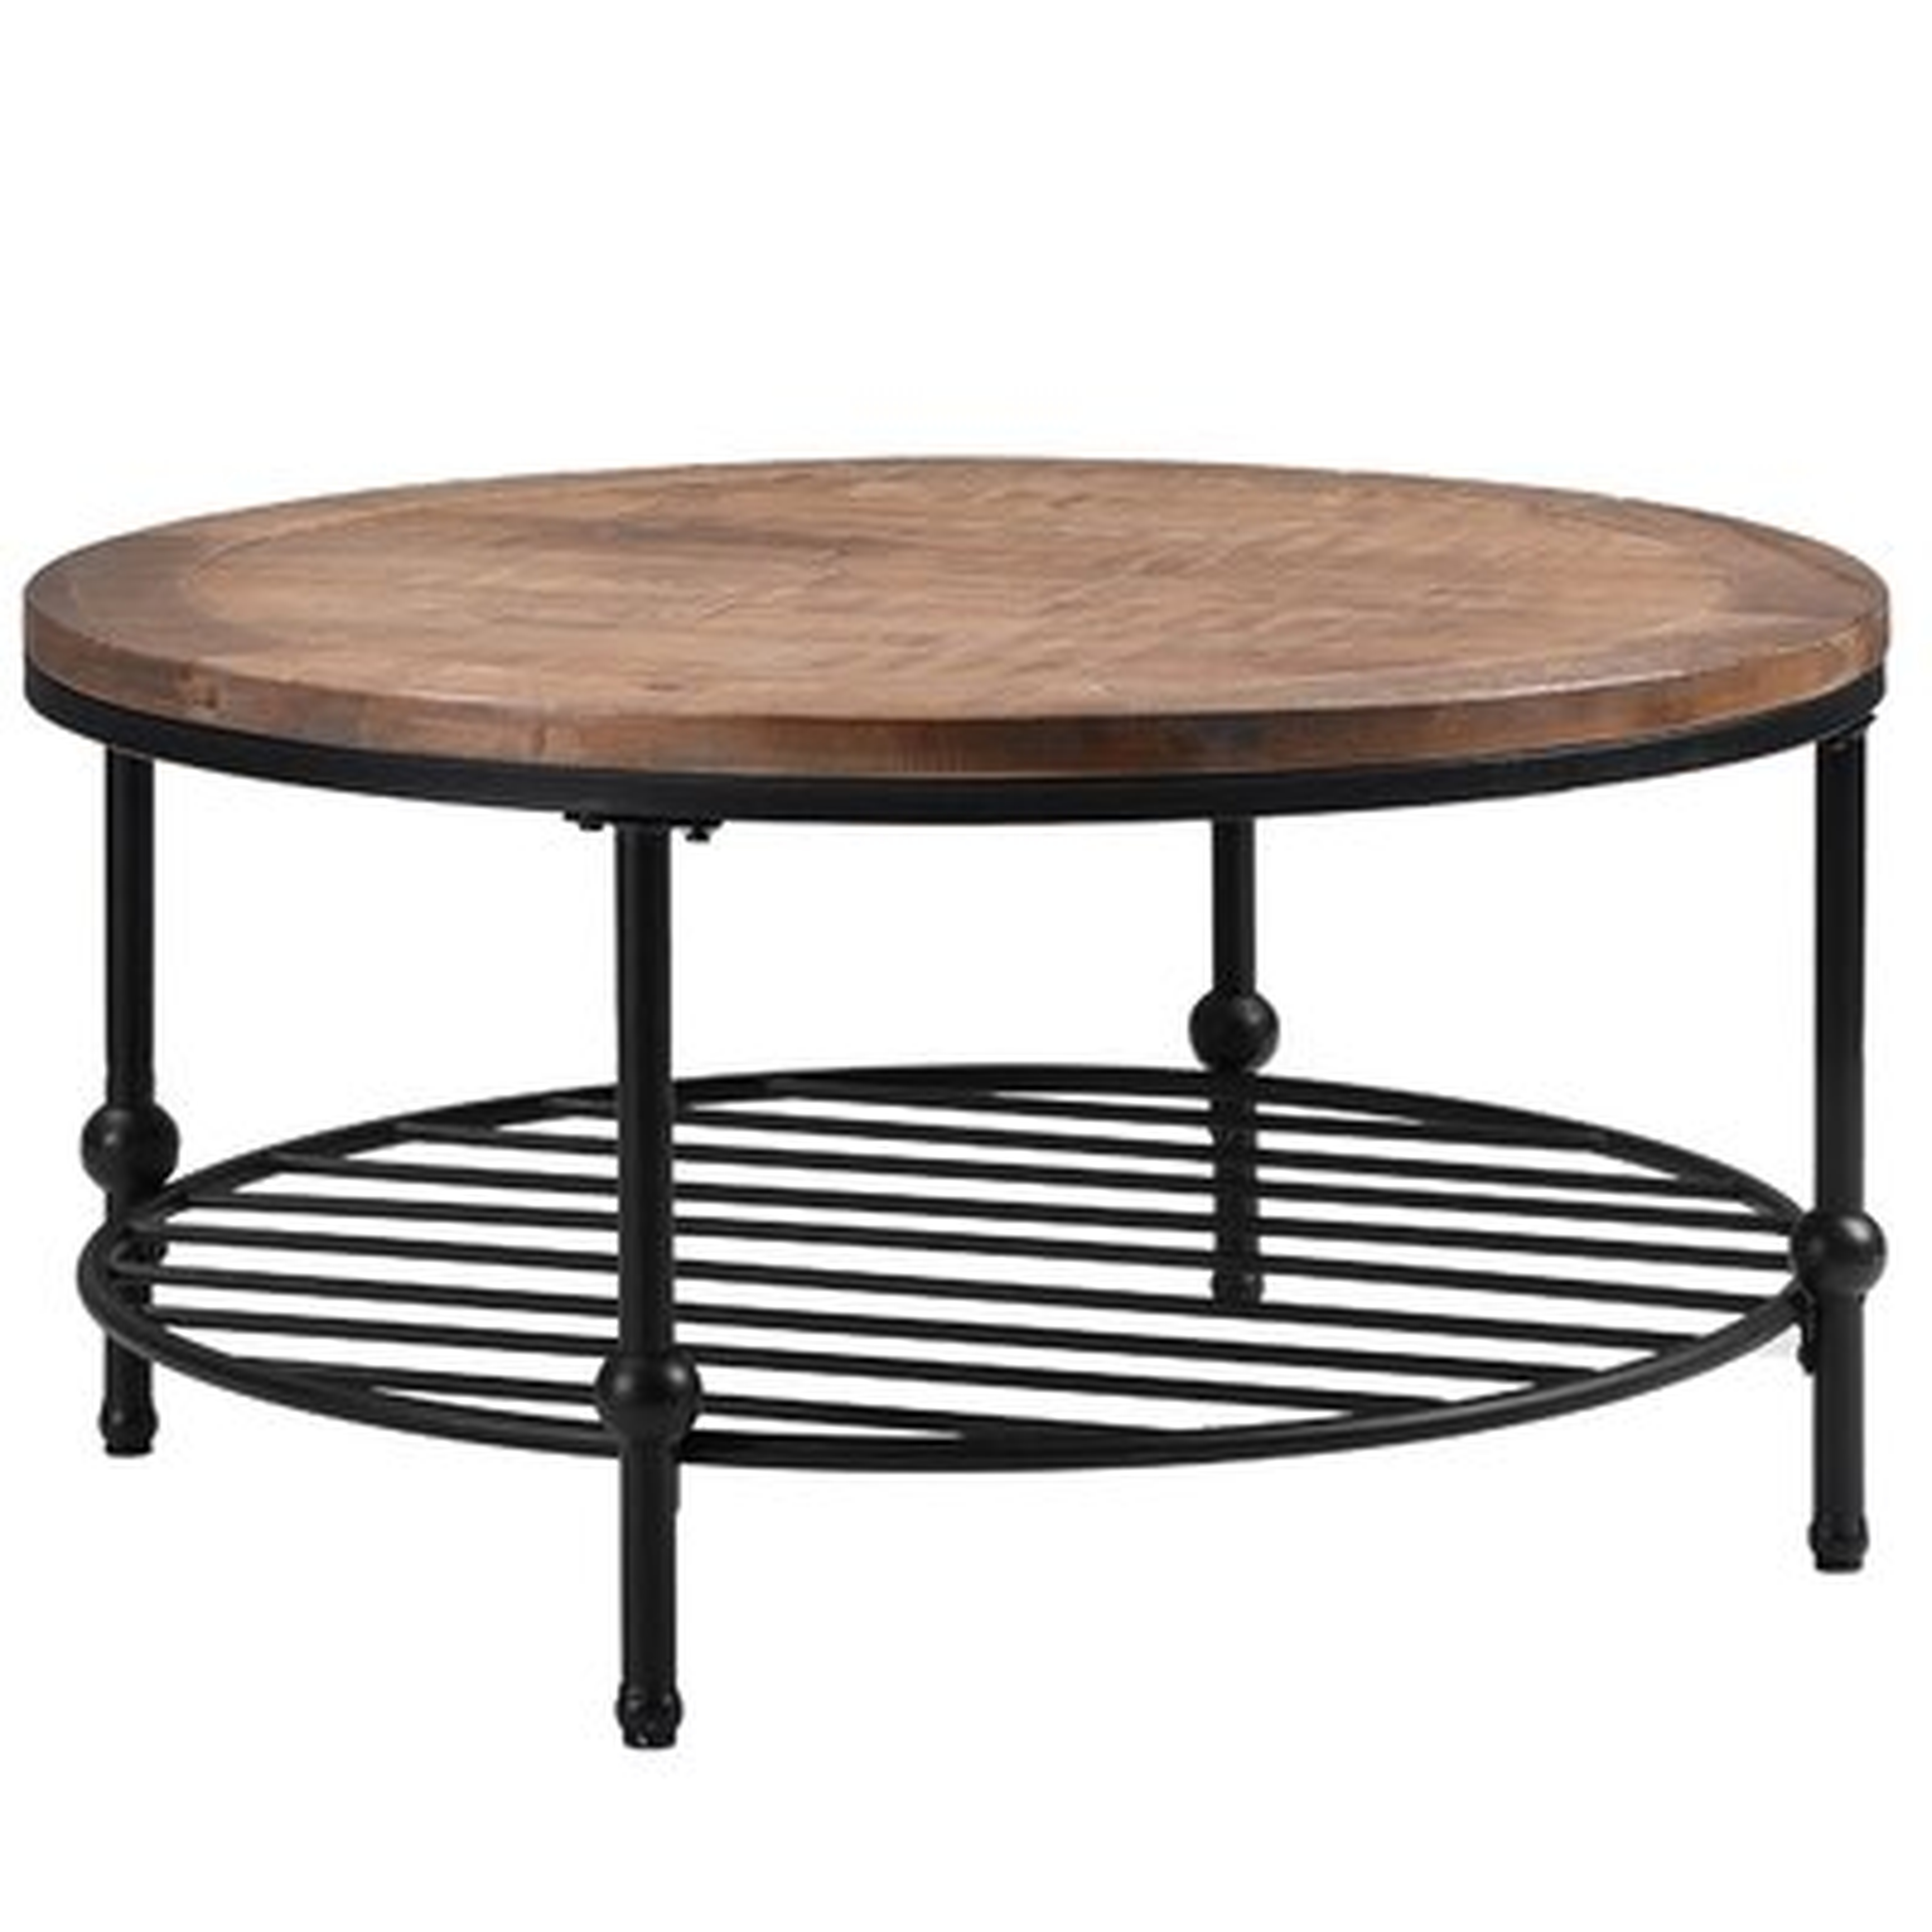 Rustic Natural Round Coffee Table With Storage Shelf - Wayfair